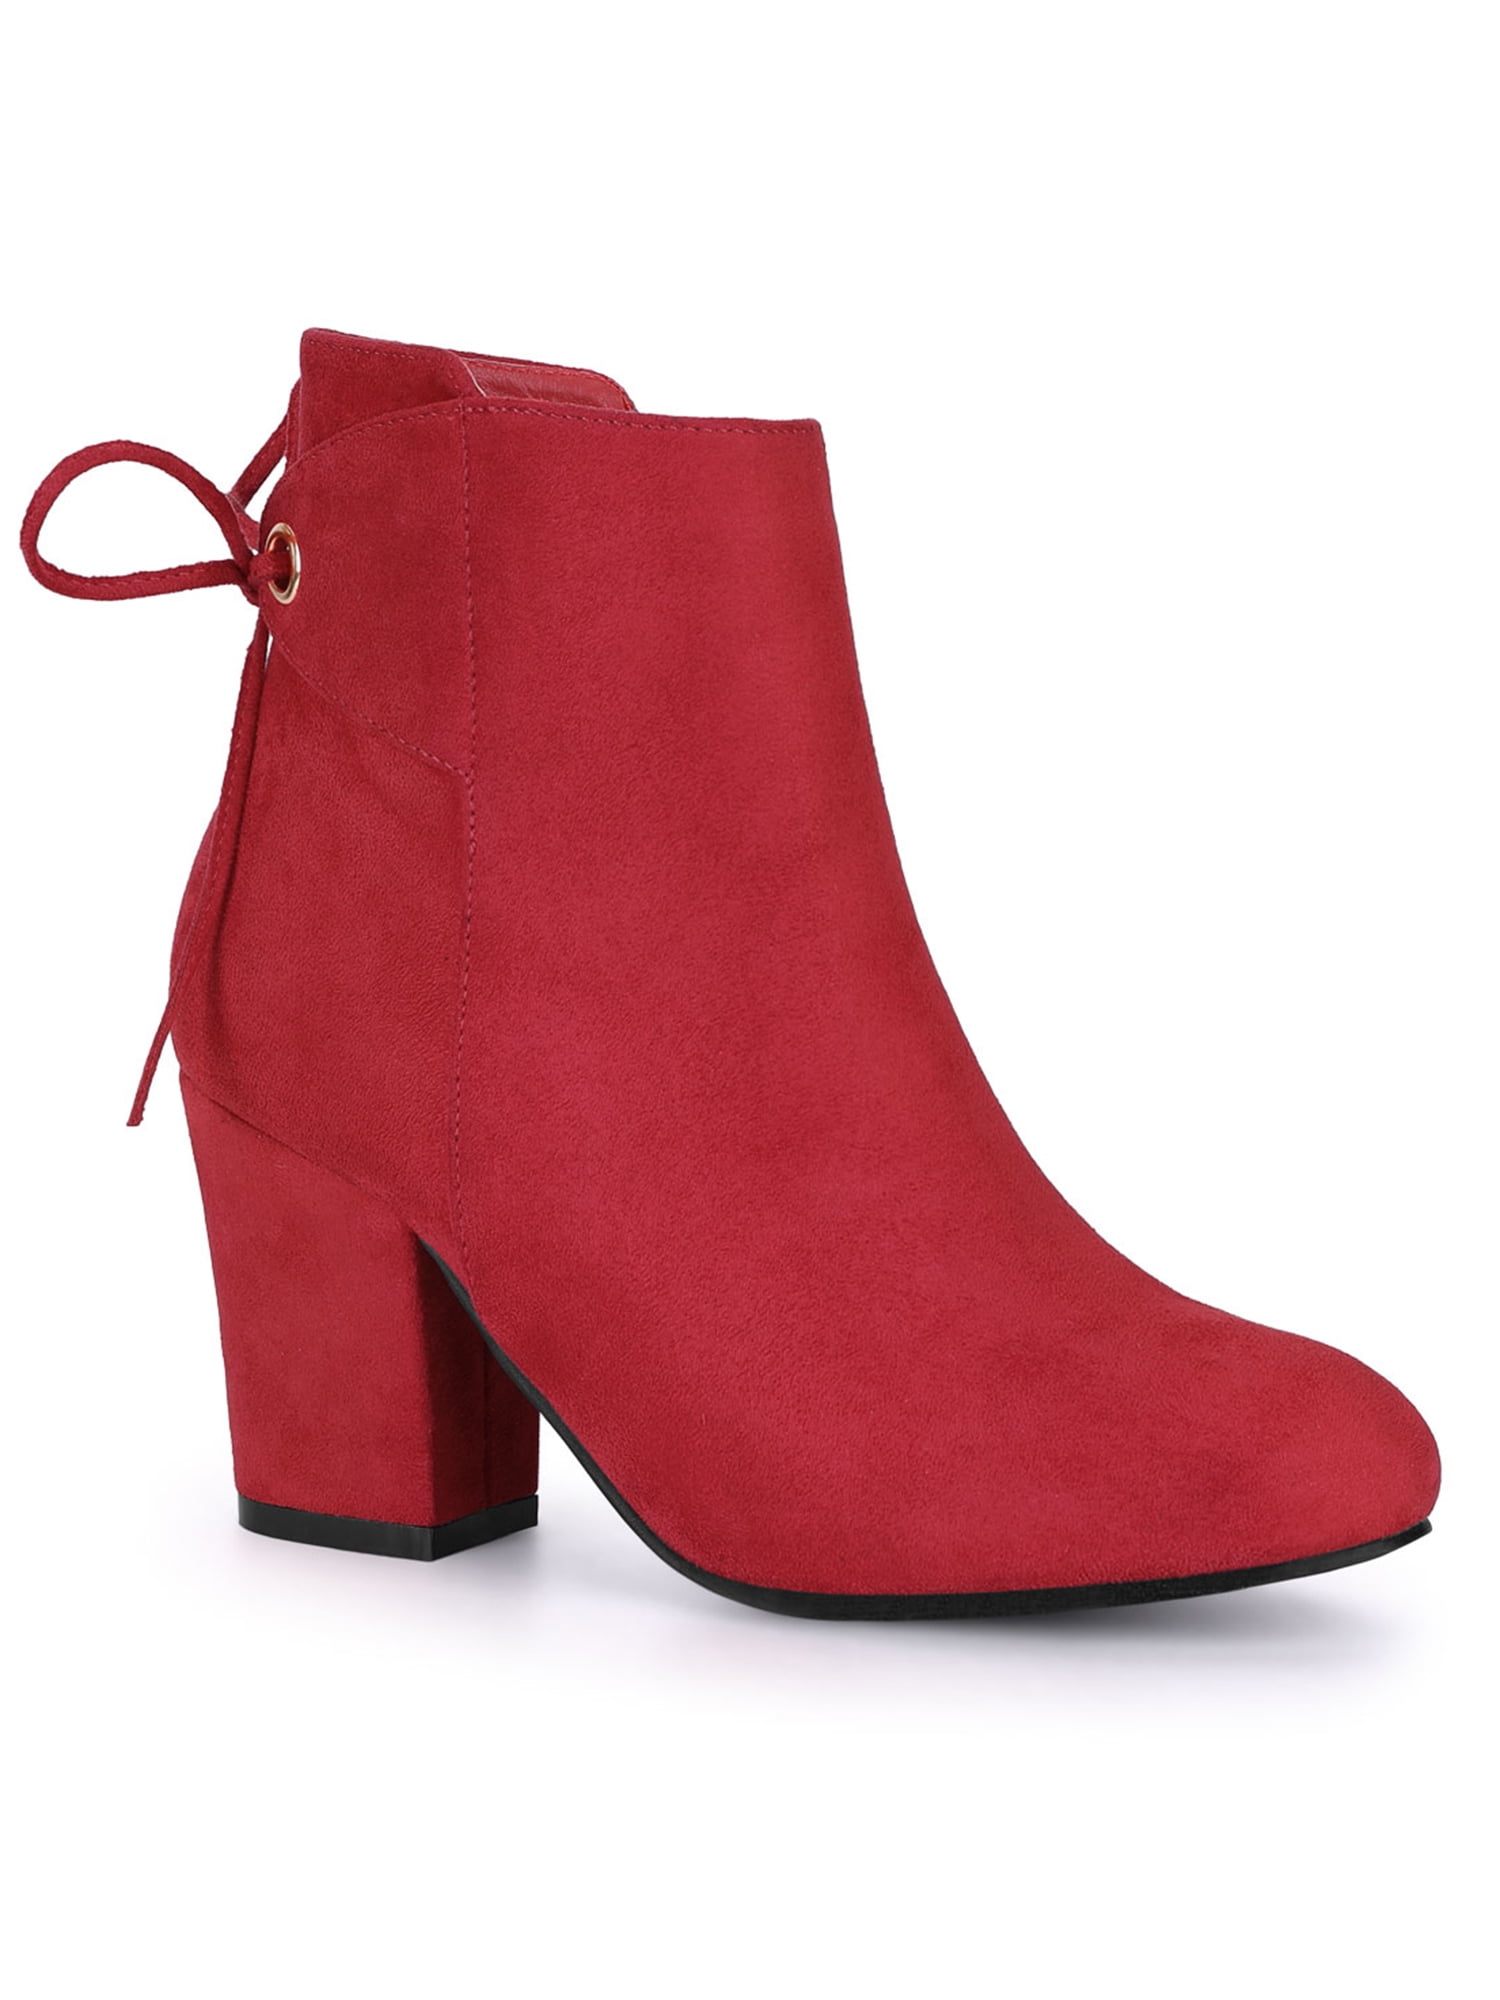 Details about   Delicious Women Thick Heels Ankle Boots Lace Zipper Booties Vino Burgundy ERICA 